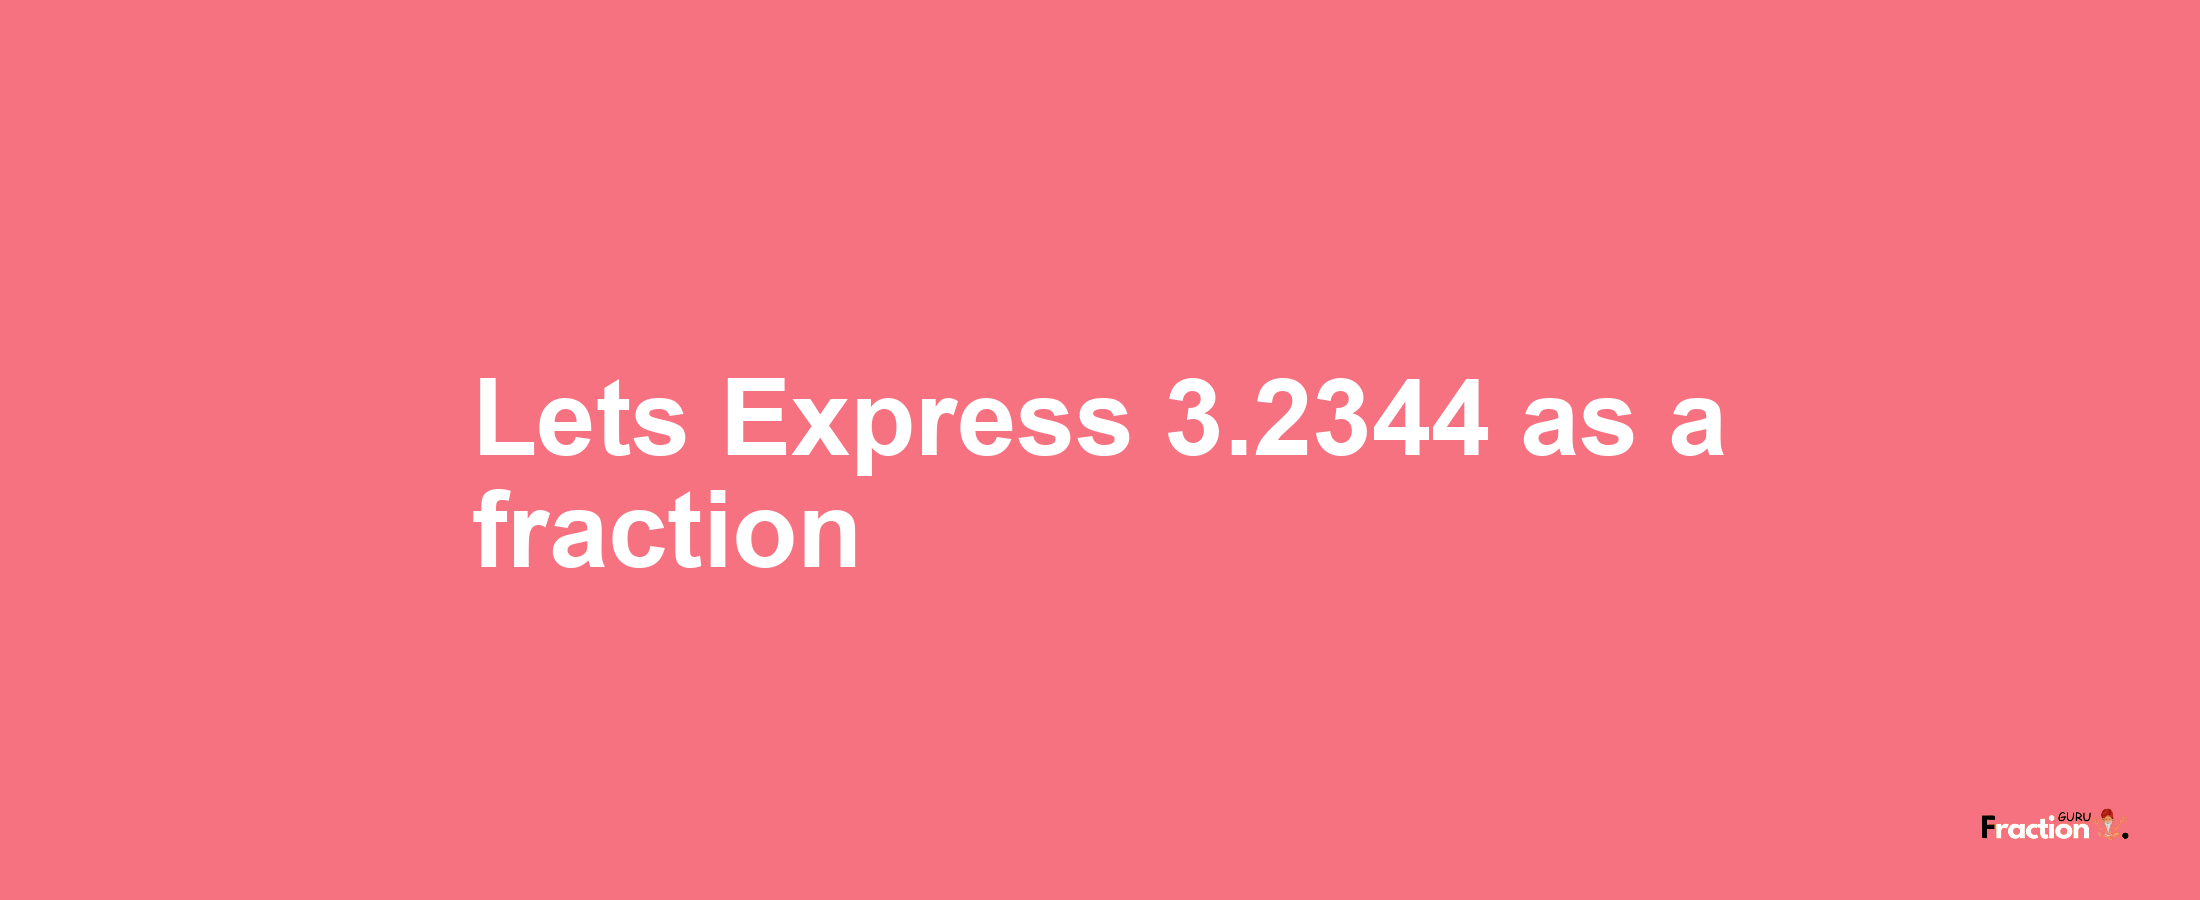 Lets Express 3.2344 as afraction